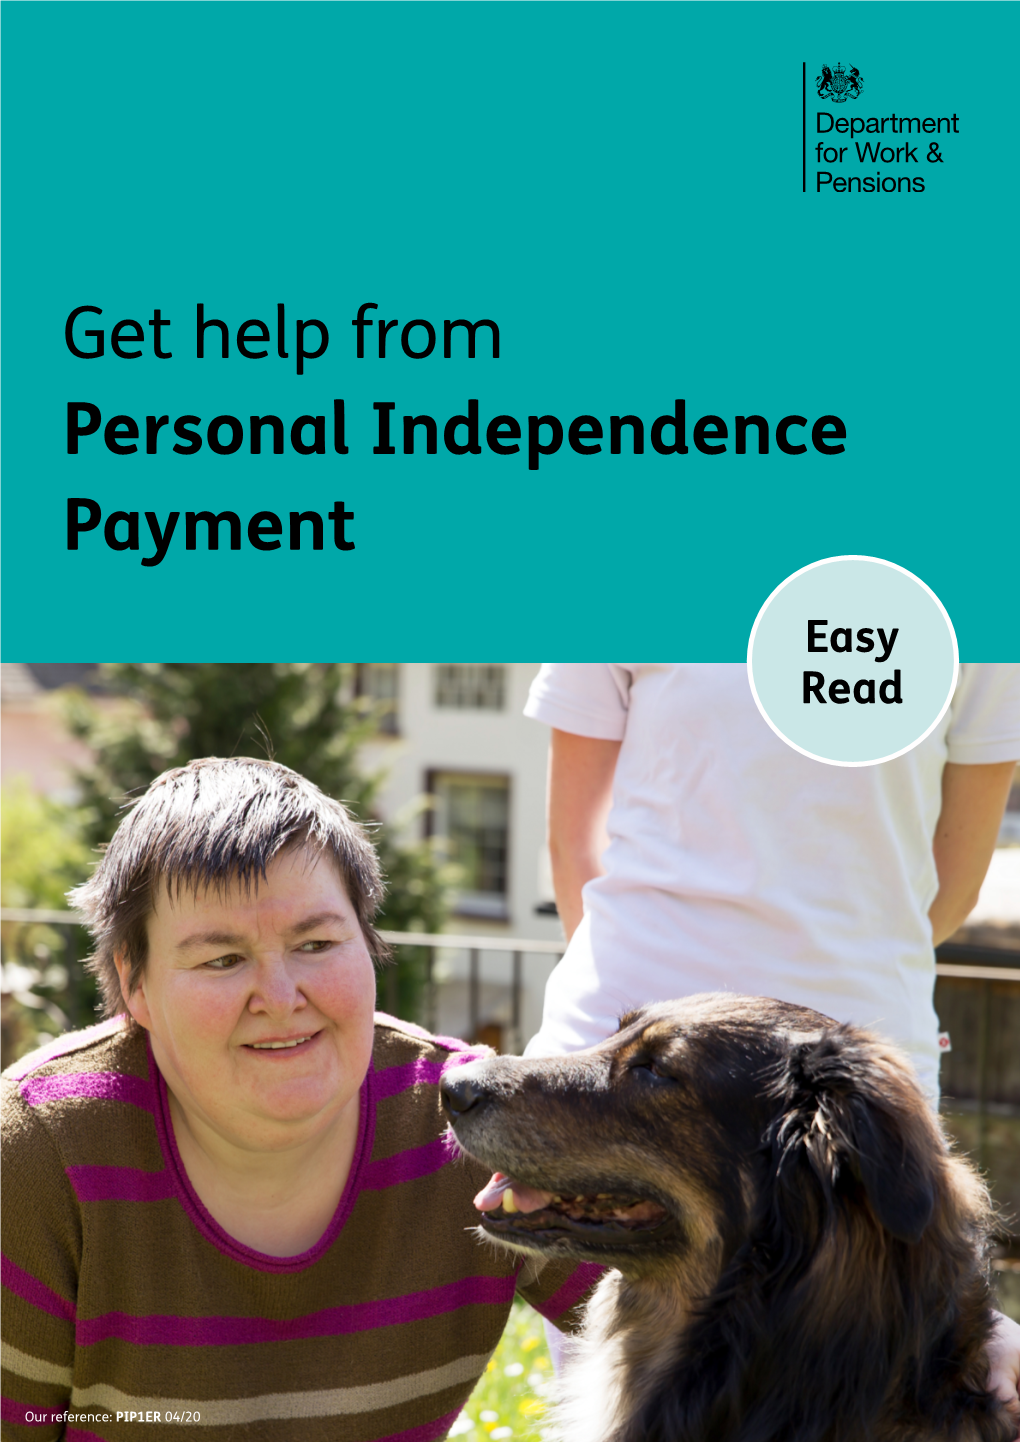 Get Help from Personal Independence Payment (Easy Read)